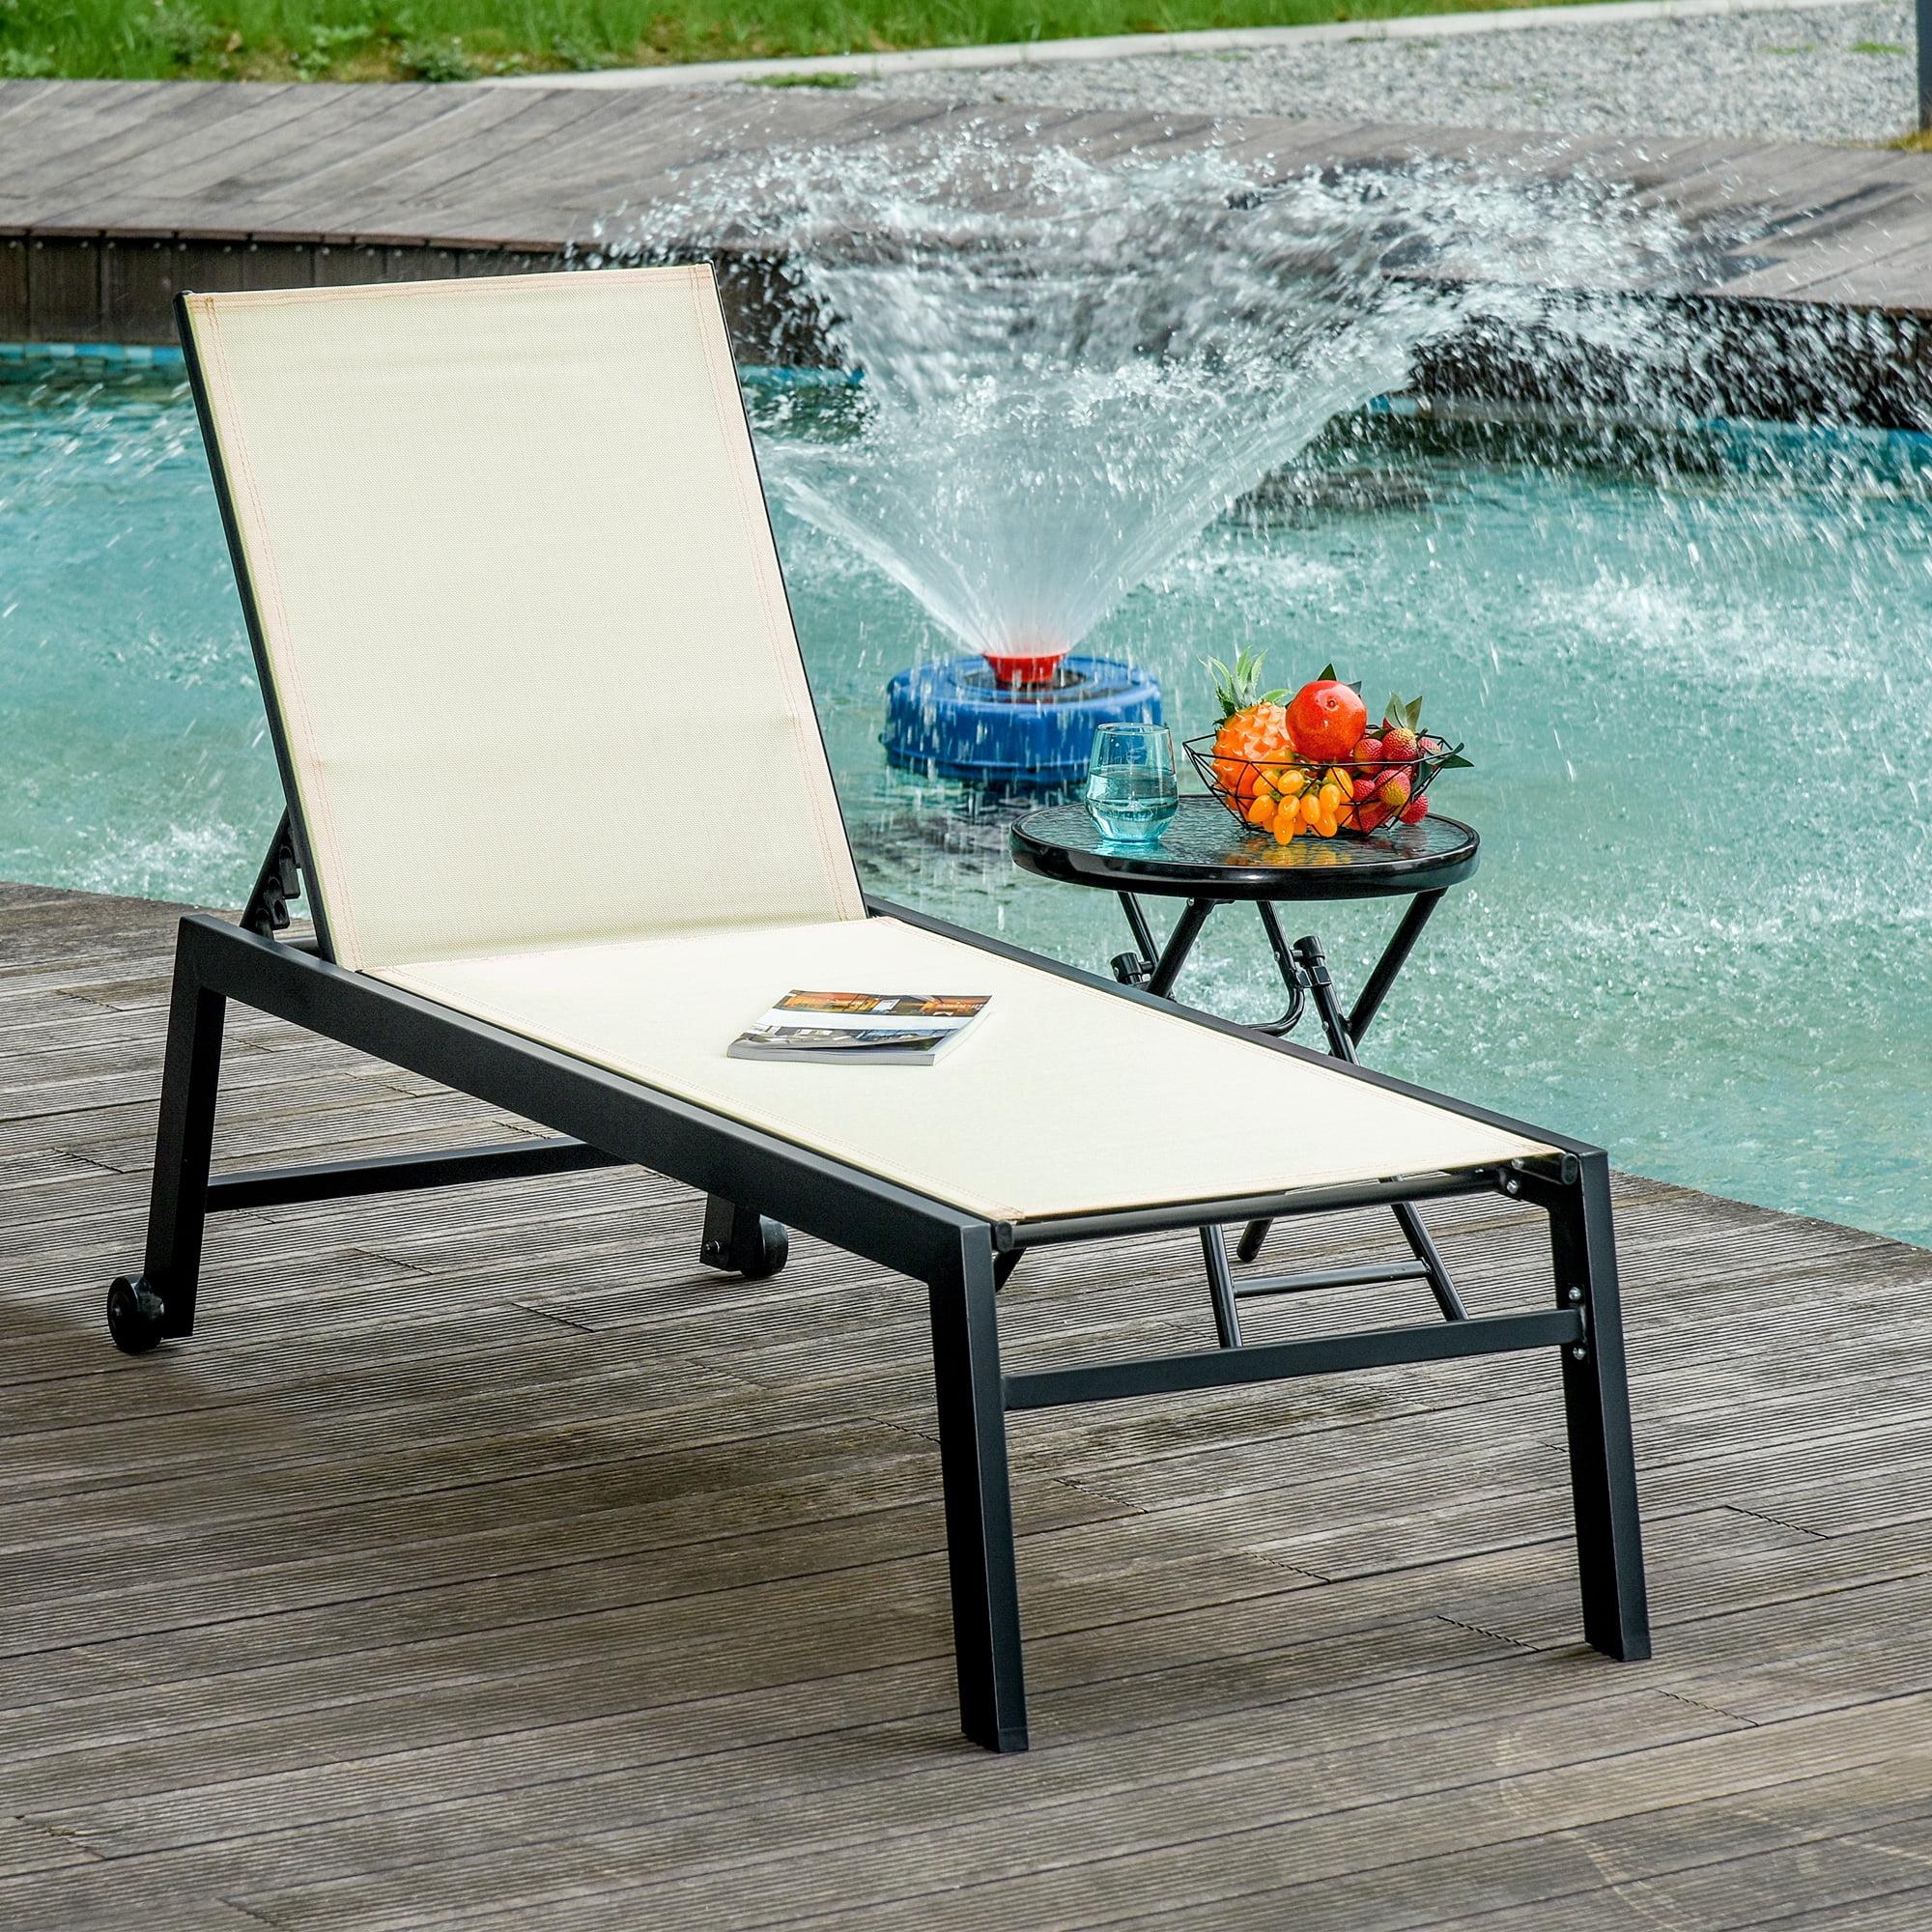 Cream Armless Outdoor Steel Chaise Lounge Chair